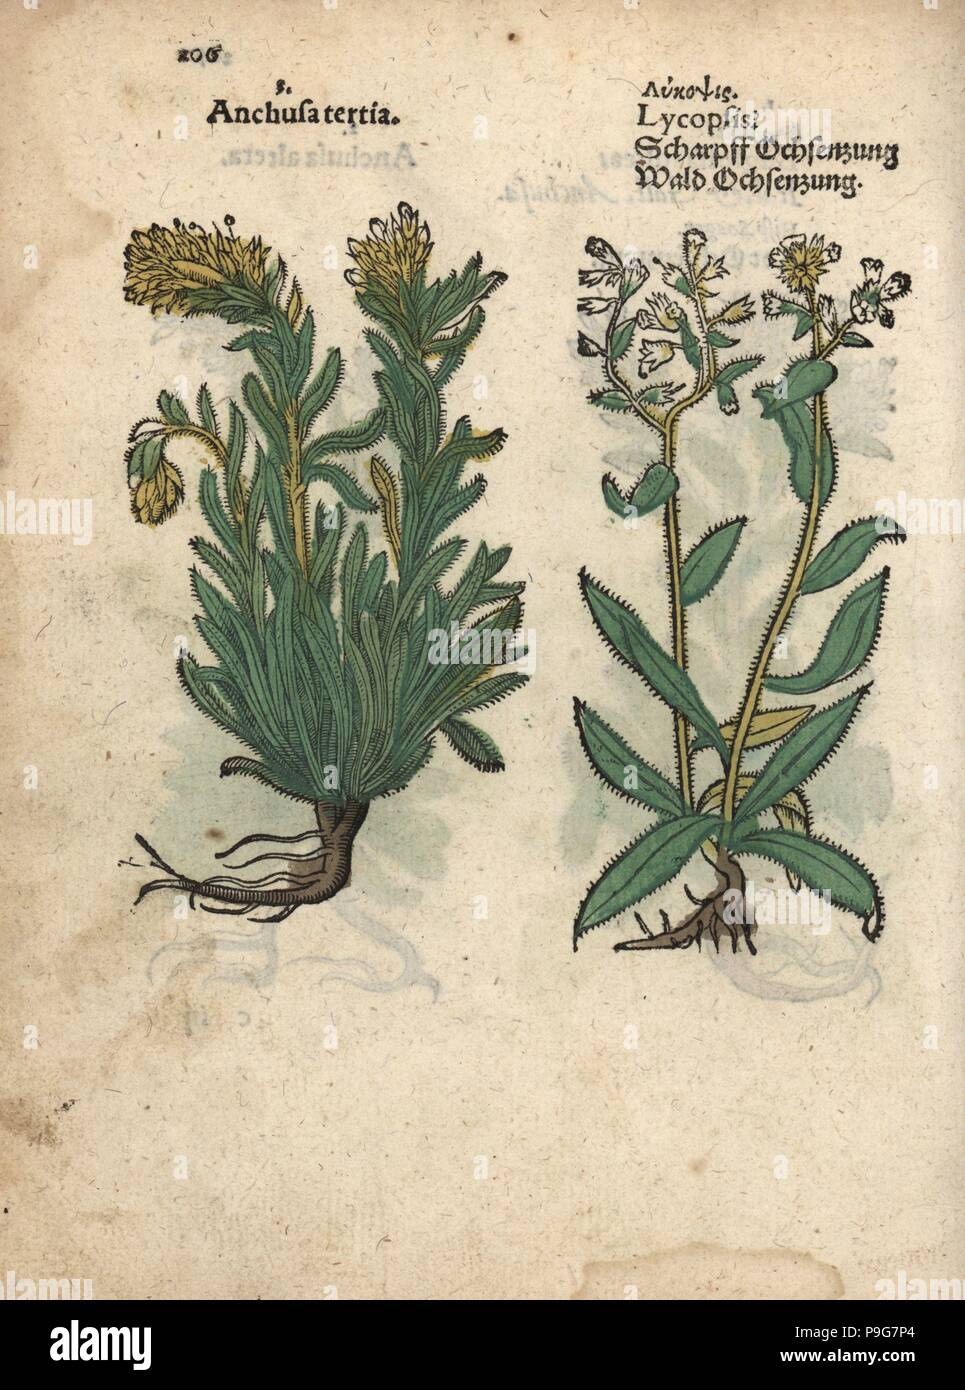 Species of yellow bugloss, Anchusa officinalis, and small bugloss, Anchusa arvensis. Handcoloured woodblock engraving of a botanical illustration from Adam Lonicer's Krauterbuch, or Herbal, Frankfurt, 1557. This from a 17th century pirate edition or atlas of illustrations only, with captions in Latin, Greek, French, Italian, German, and in English manuscript. Stock Photo